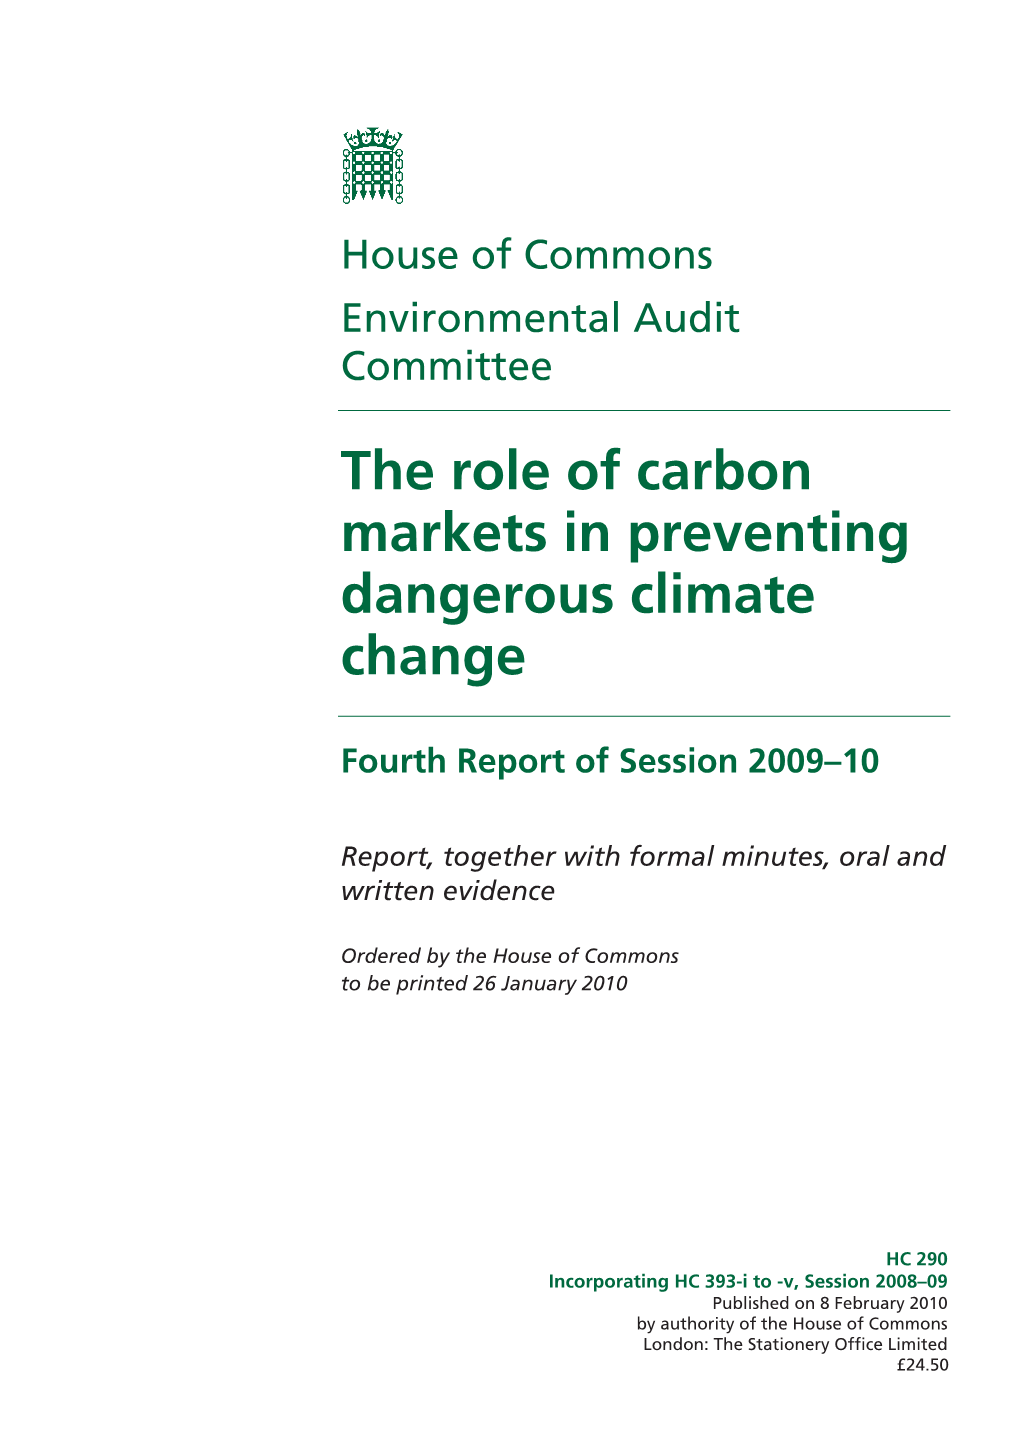 The Role of Carbon Markets in Preventing Dangerous Climate Change